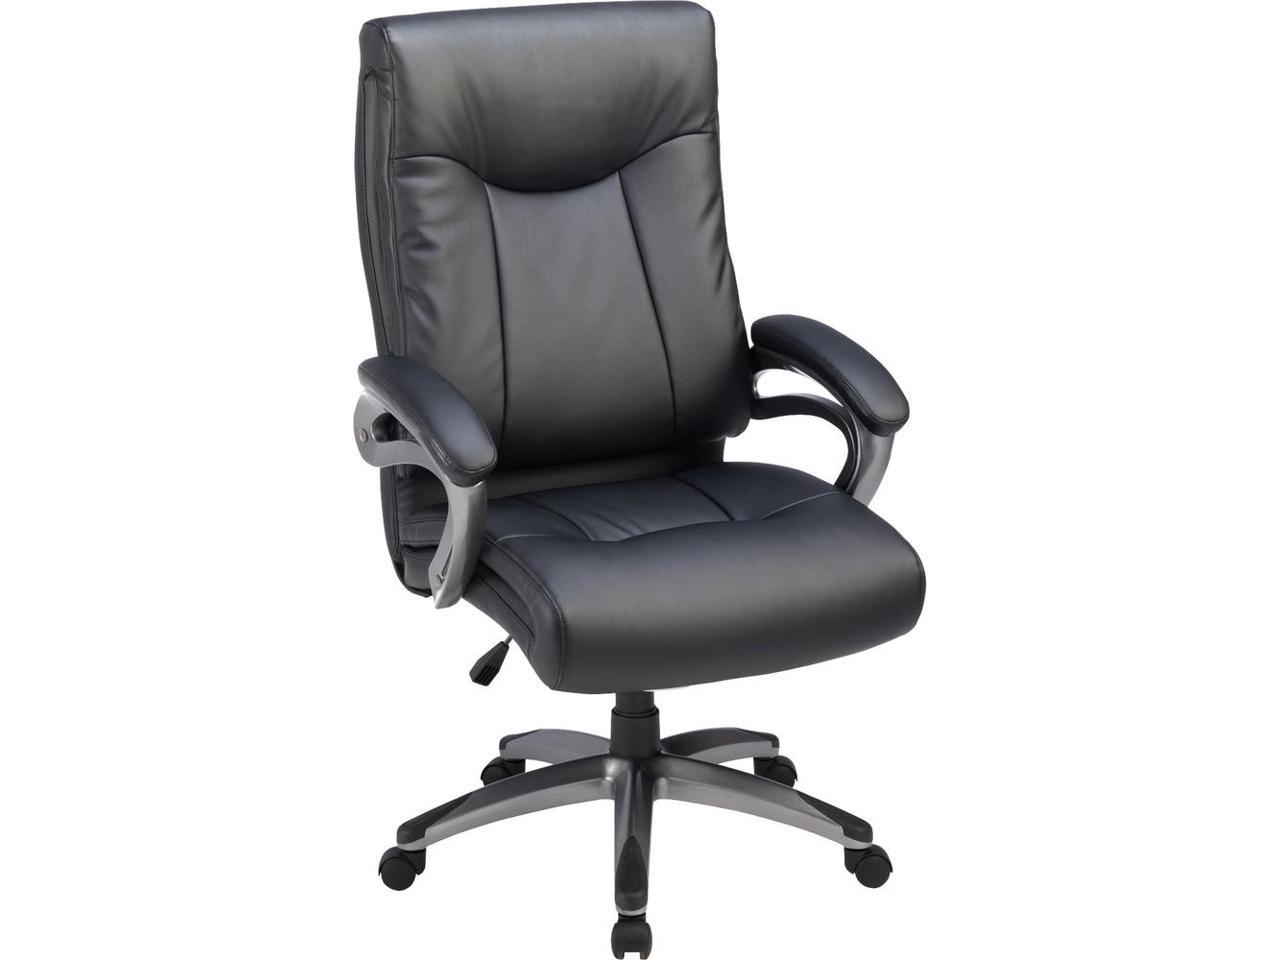 Lorell High-Back Exec Chair Leather 27"x30"x46-1/2" BK 69516 - image 3 of 7